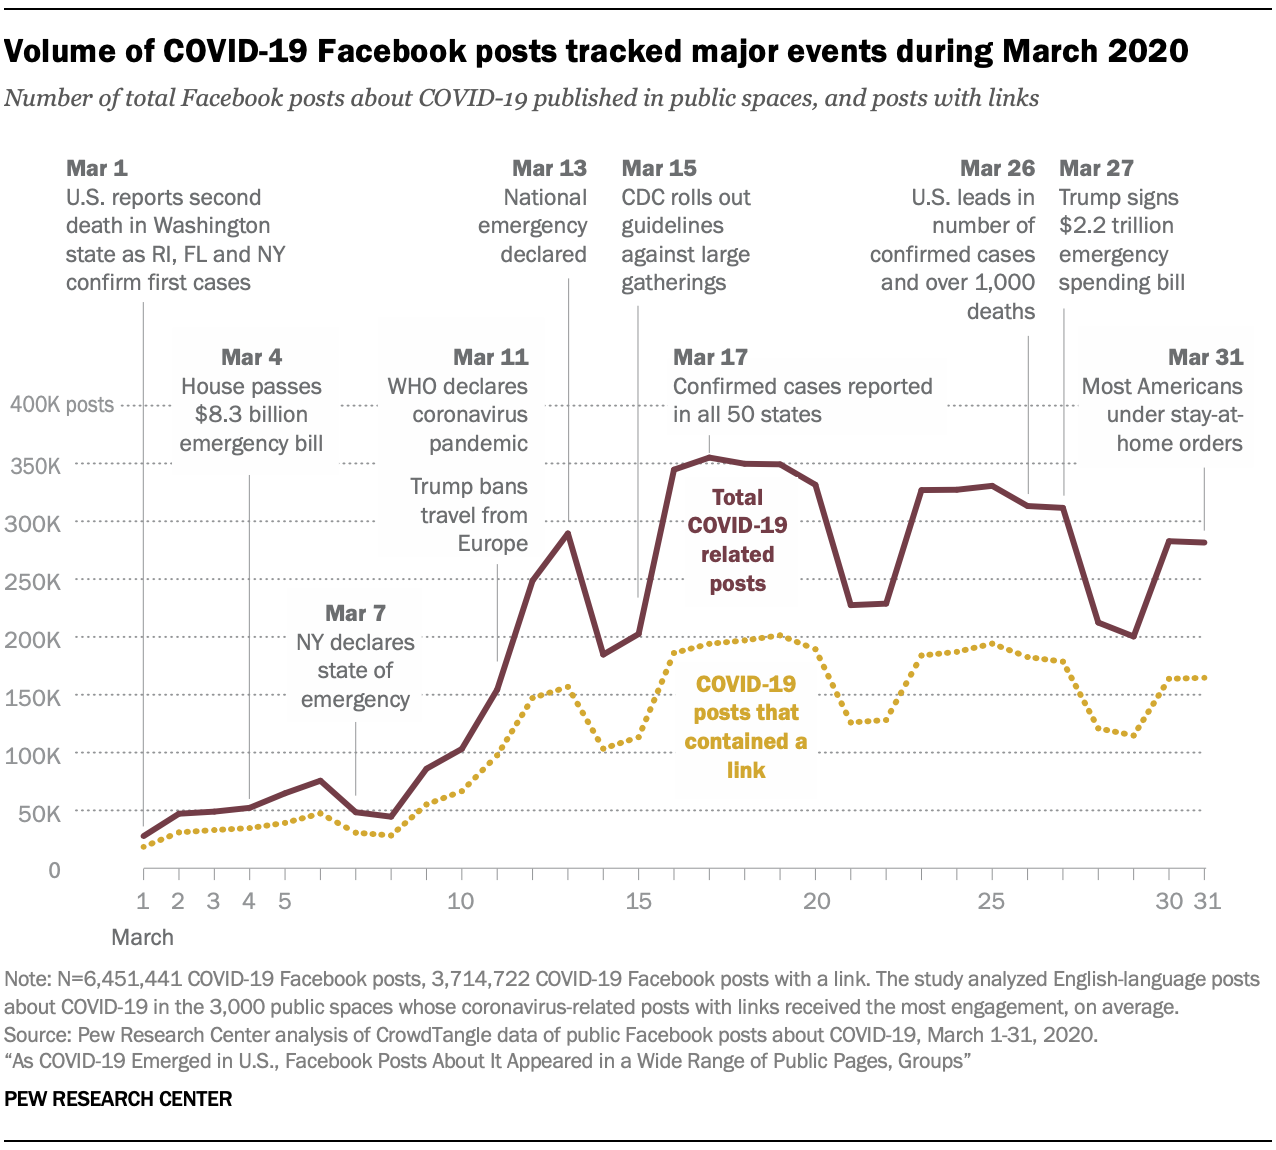 Volume of COVID-19 Facebook posts tracked major events during March 2020 